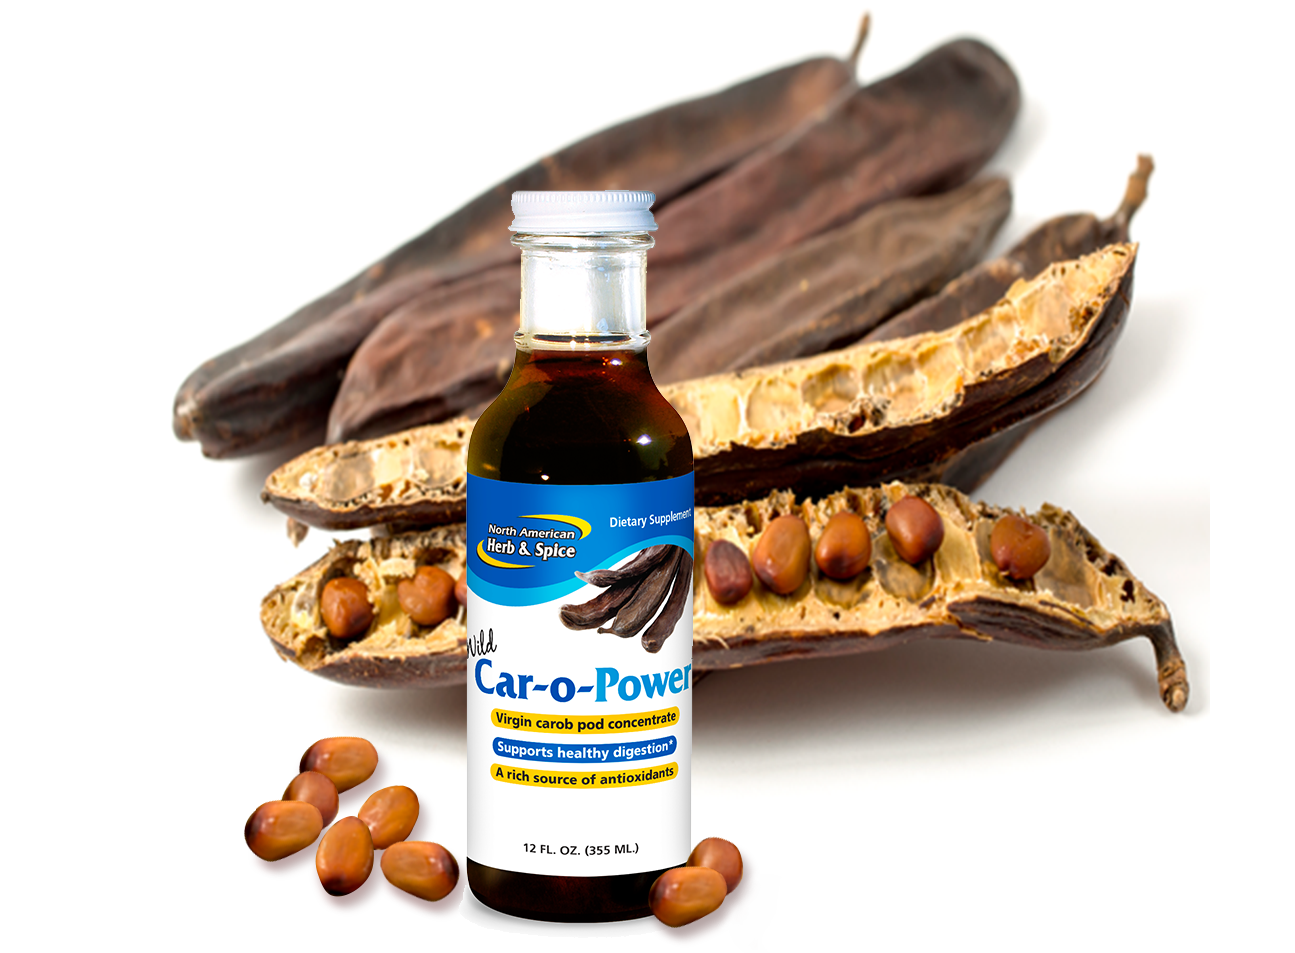 Carob ingredient with Car-o-Power product